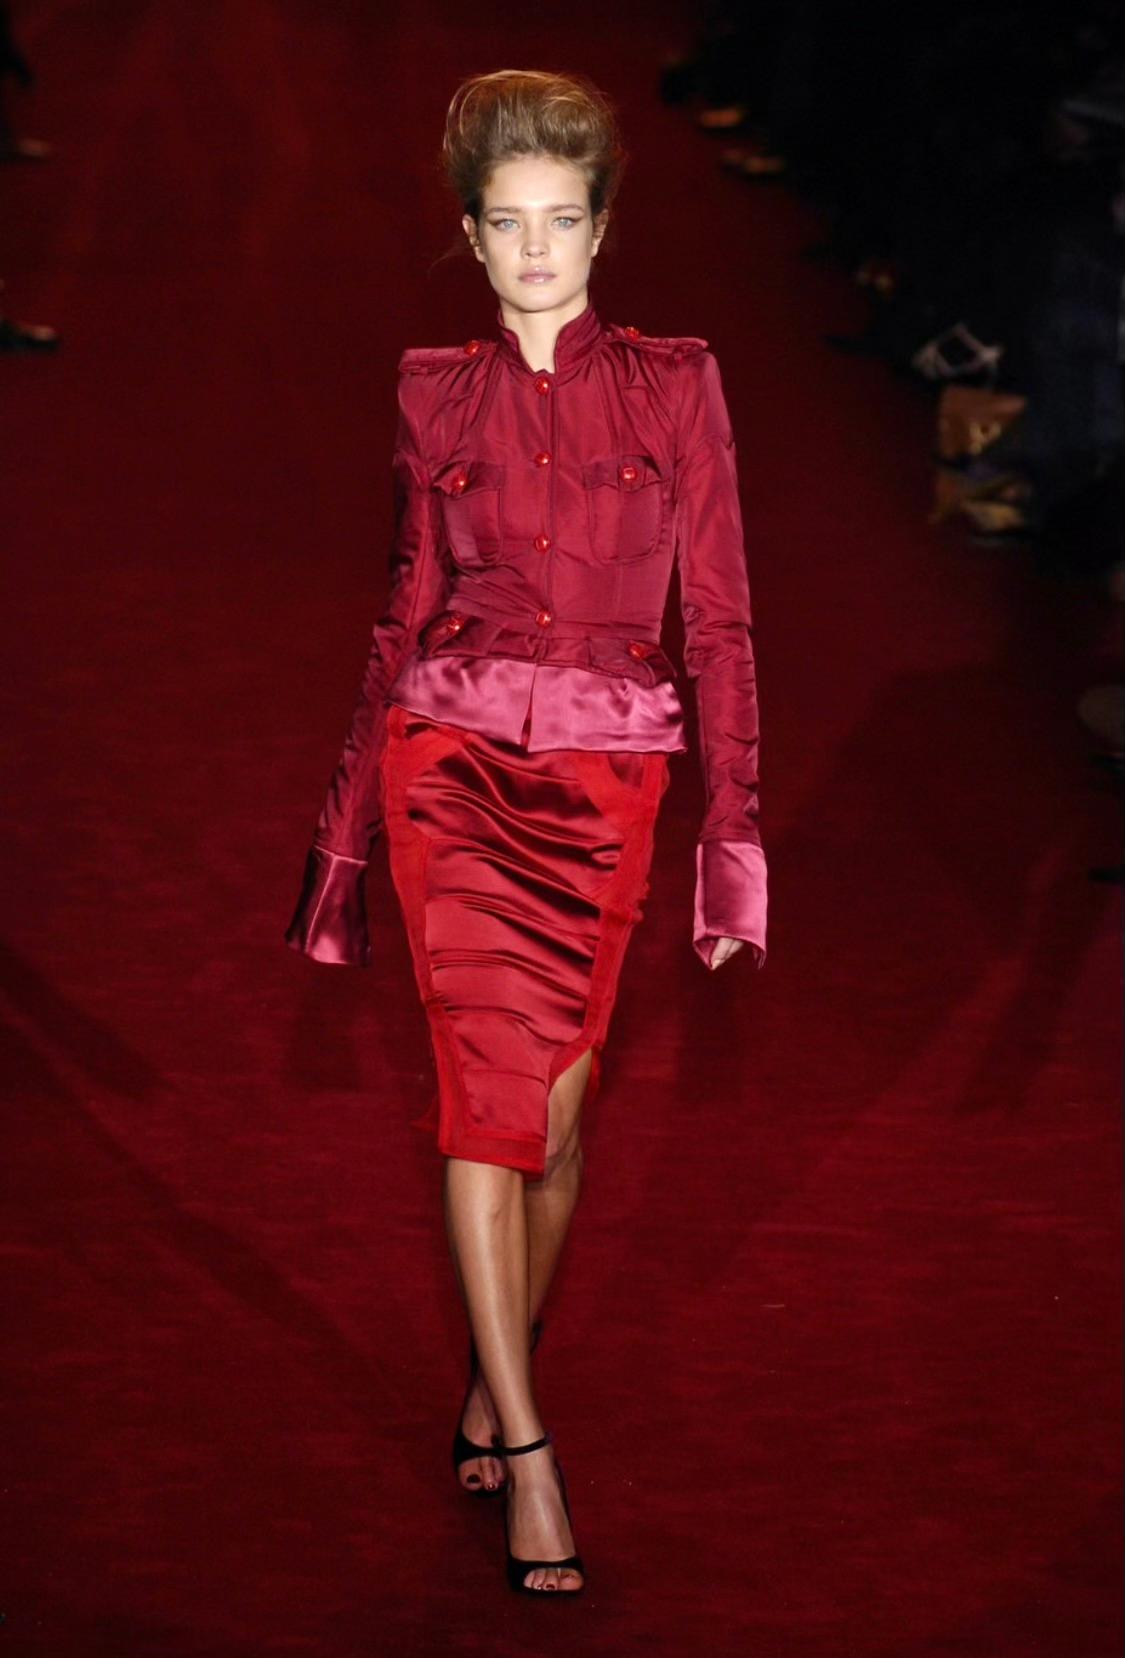 Presenting a striking red cropped silk blazer jacket designed by Tom Ford for Yves Saint Laurent Rive Gauche's Fall/Winter 2004 collection. This collection, commonly referred to as 